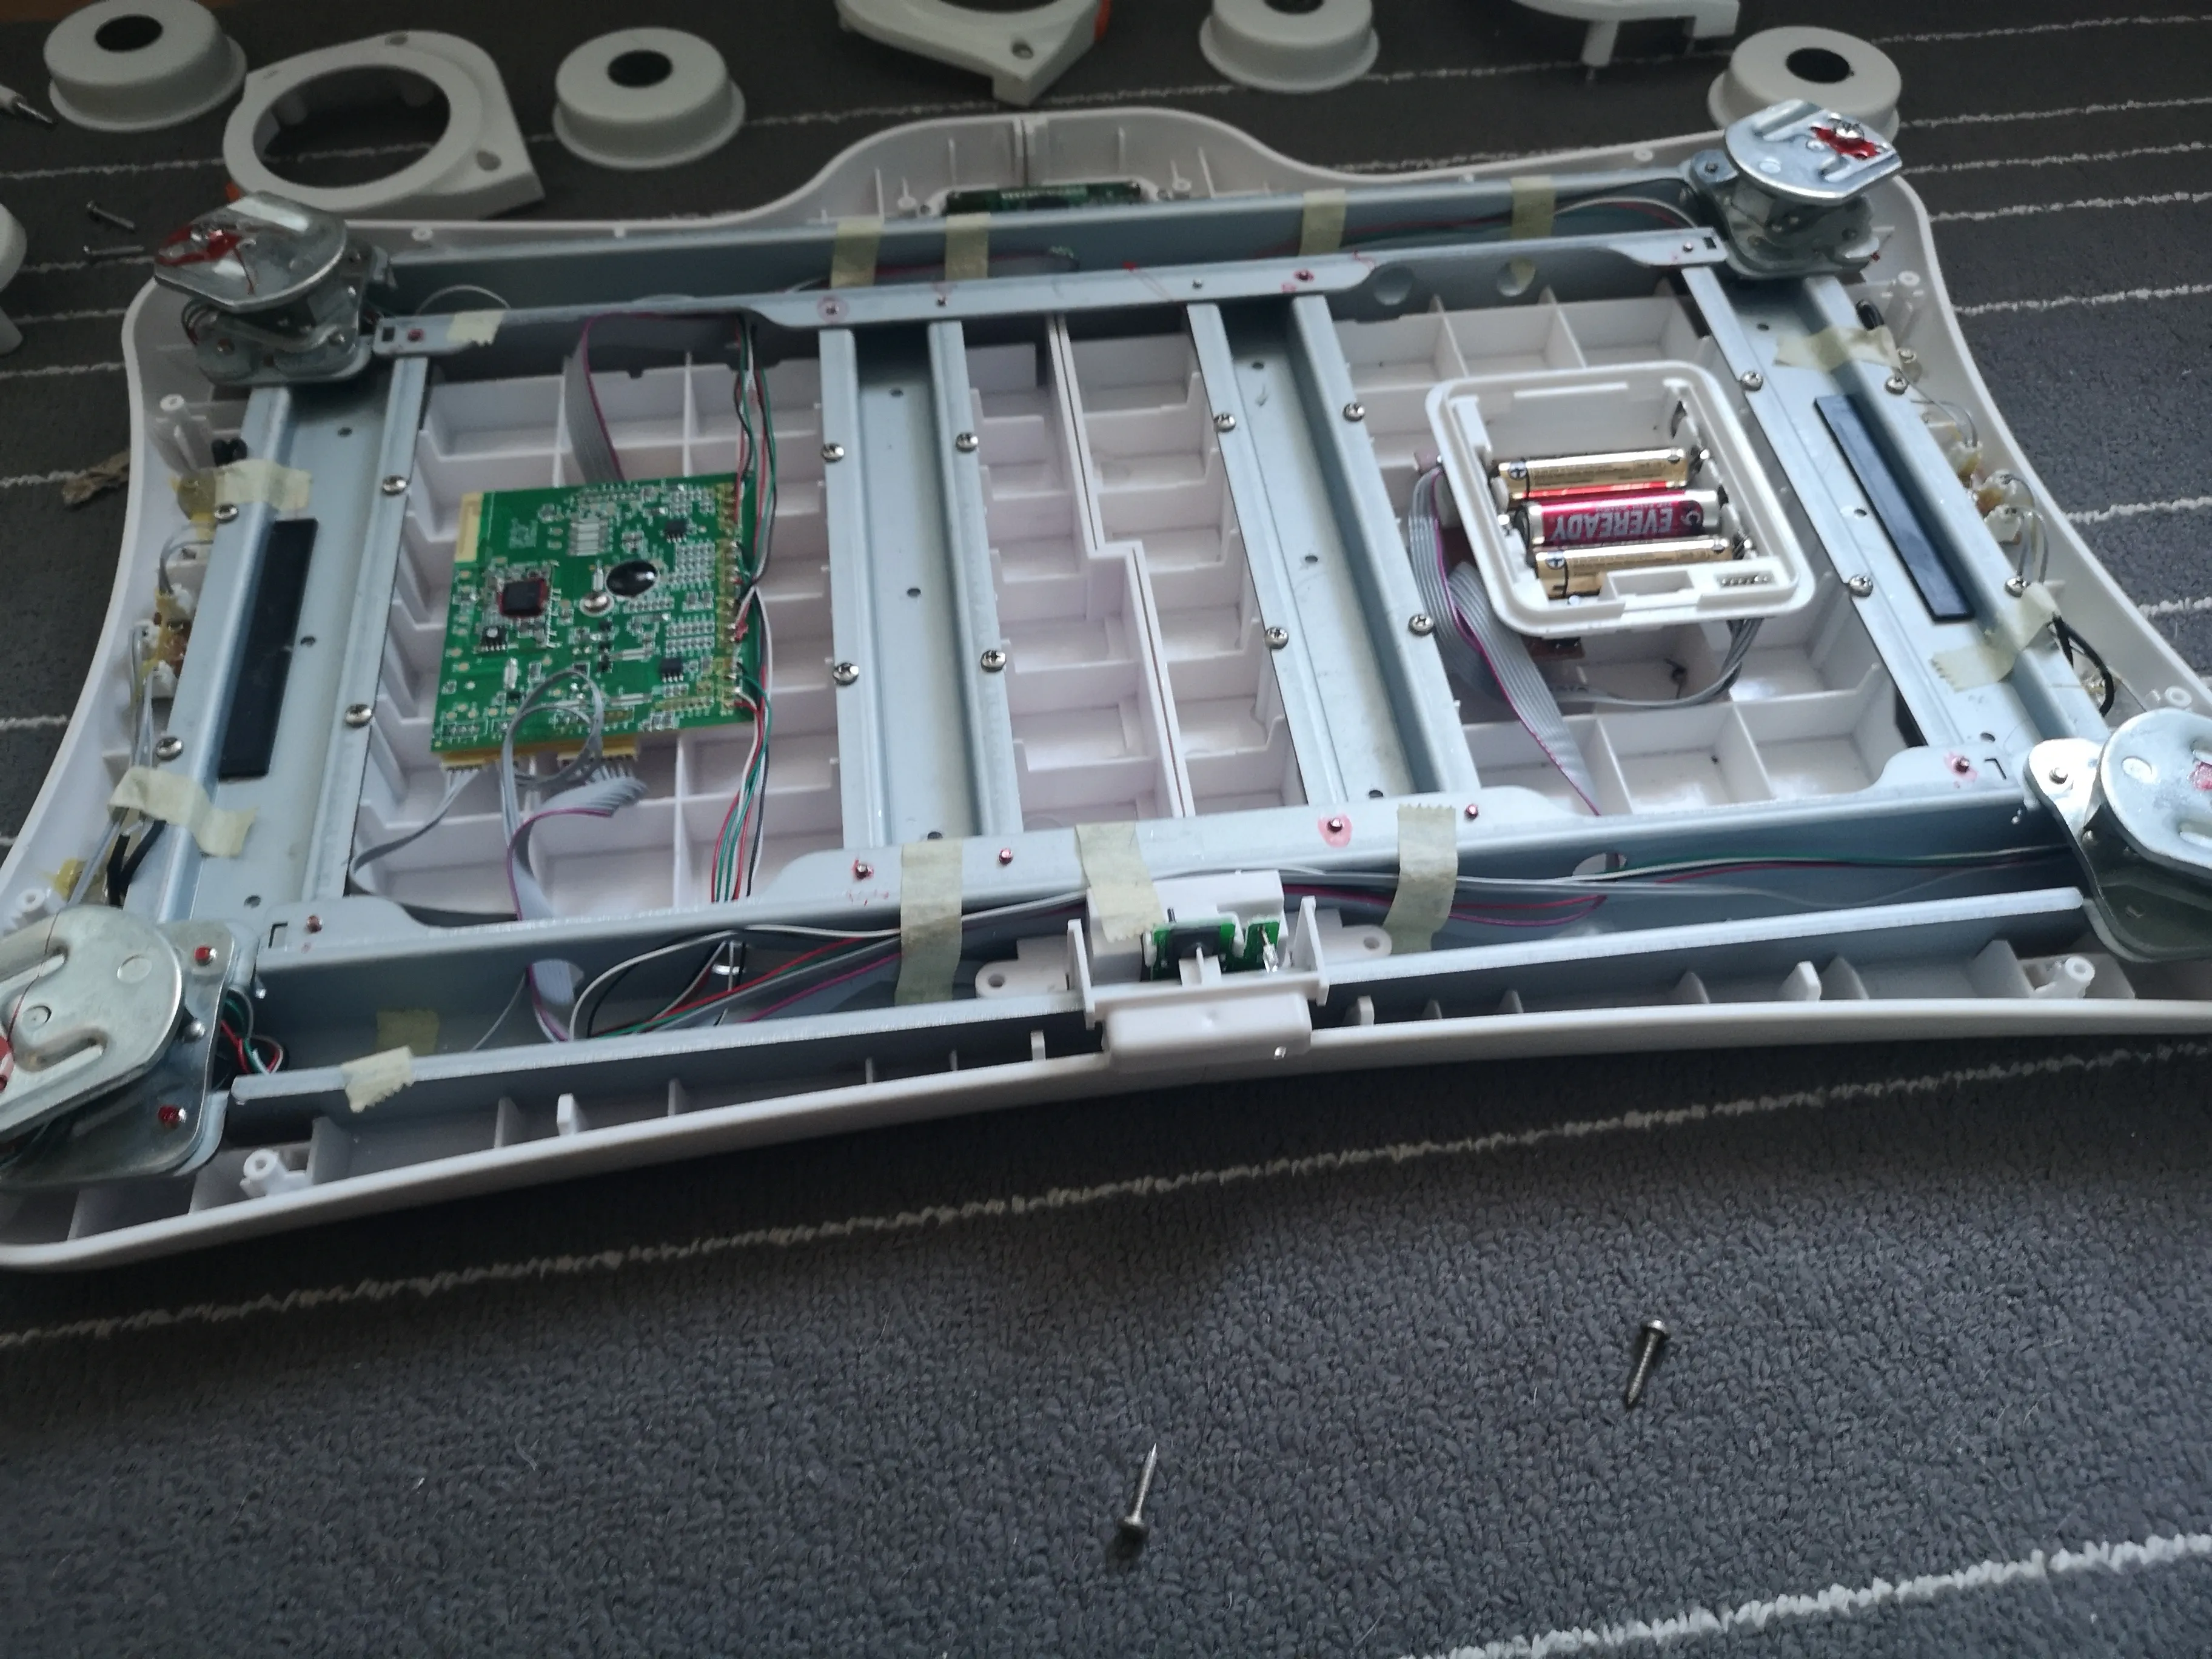 Image of a disassembled Wii Balance Board